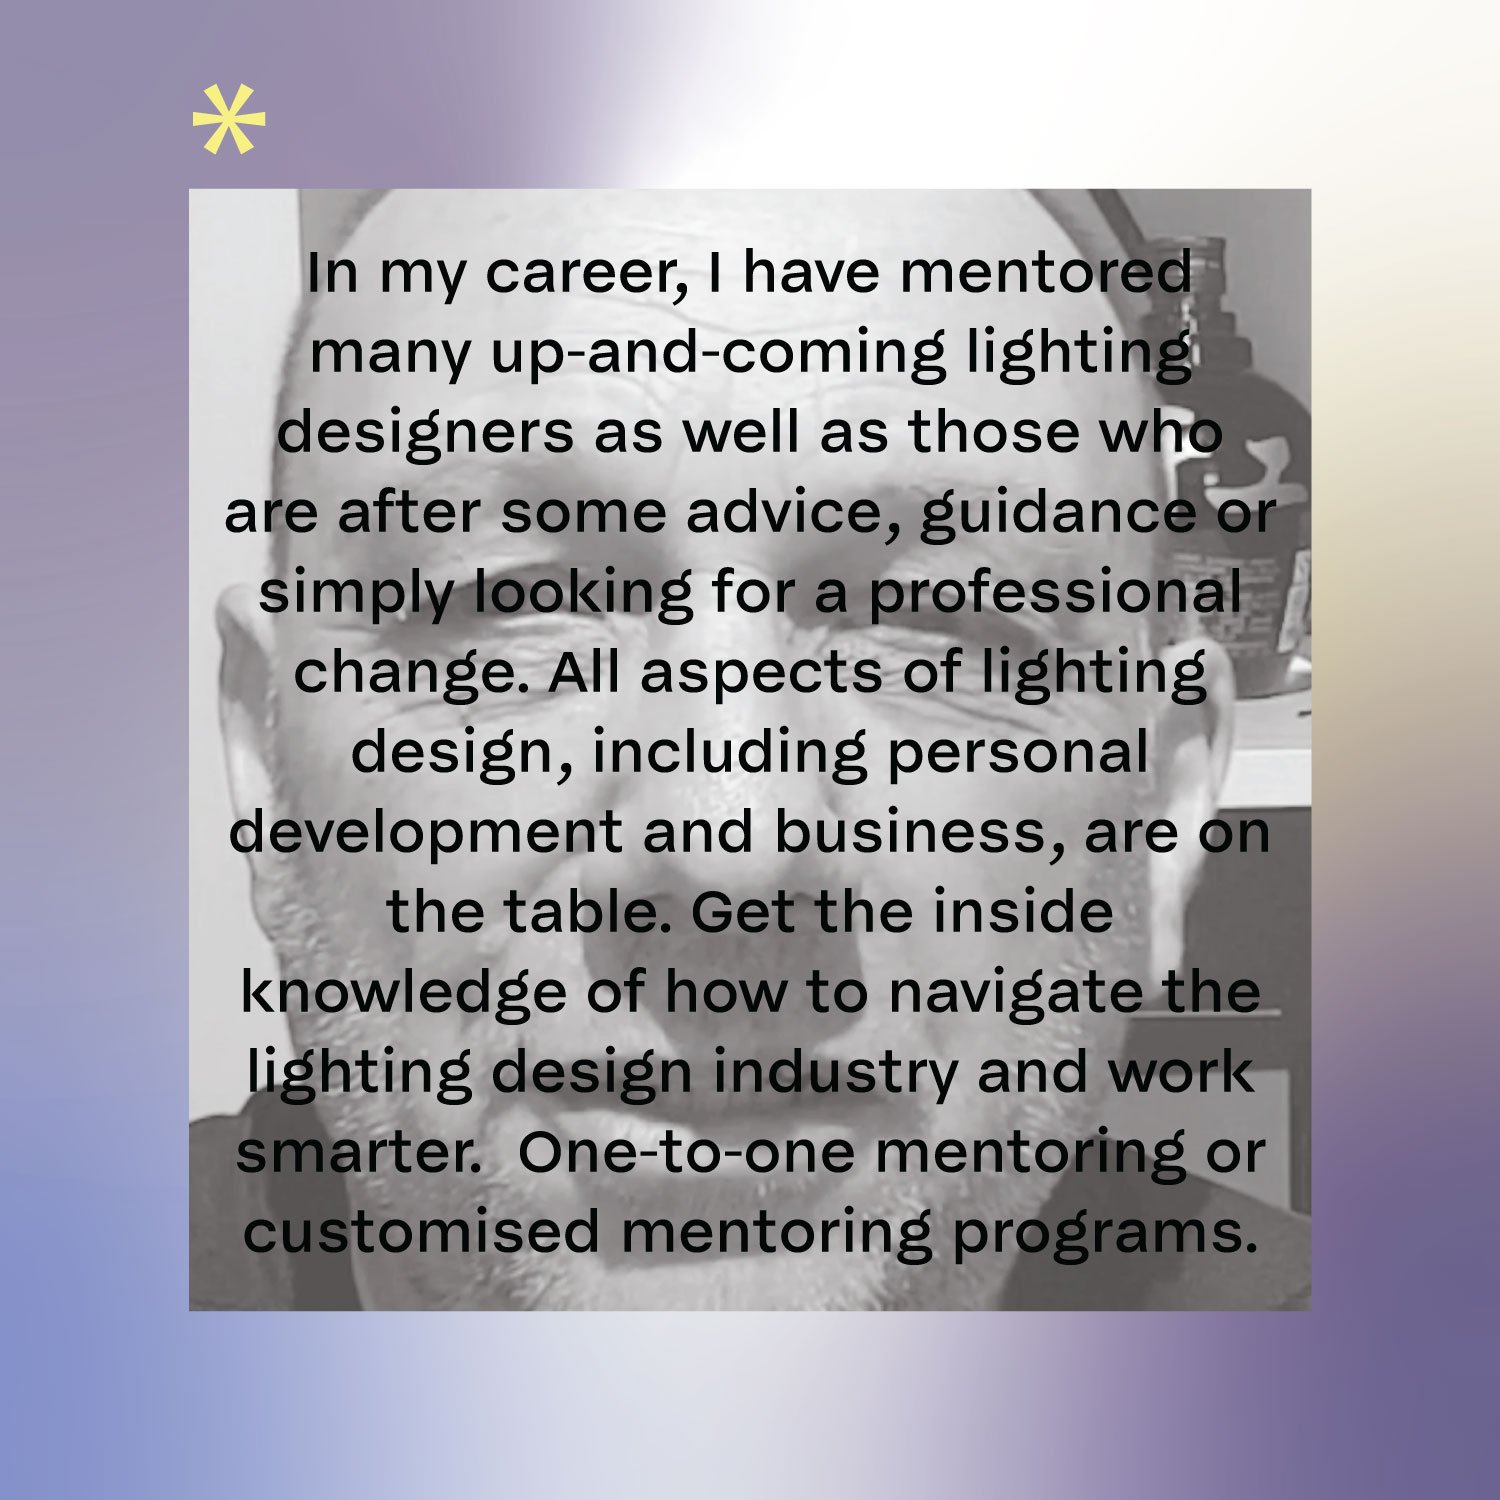 Visual representation of the detailed description of Martin Klaasen's expert mentoring services as displayed on the Light Talk website.